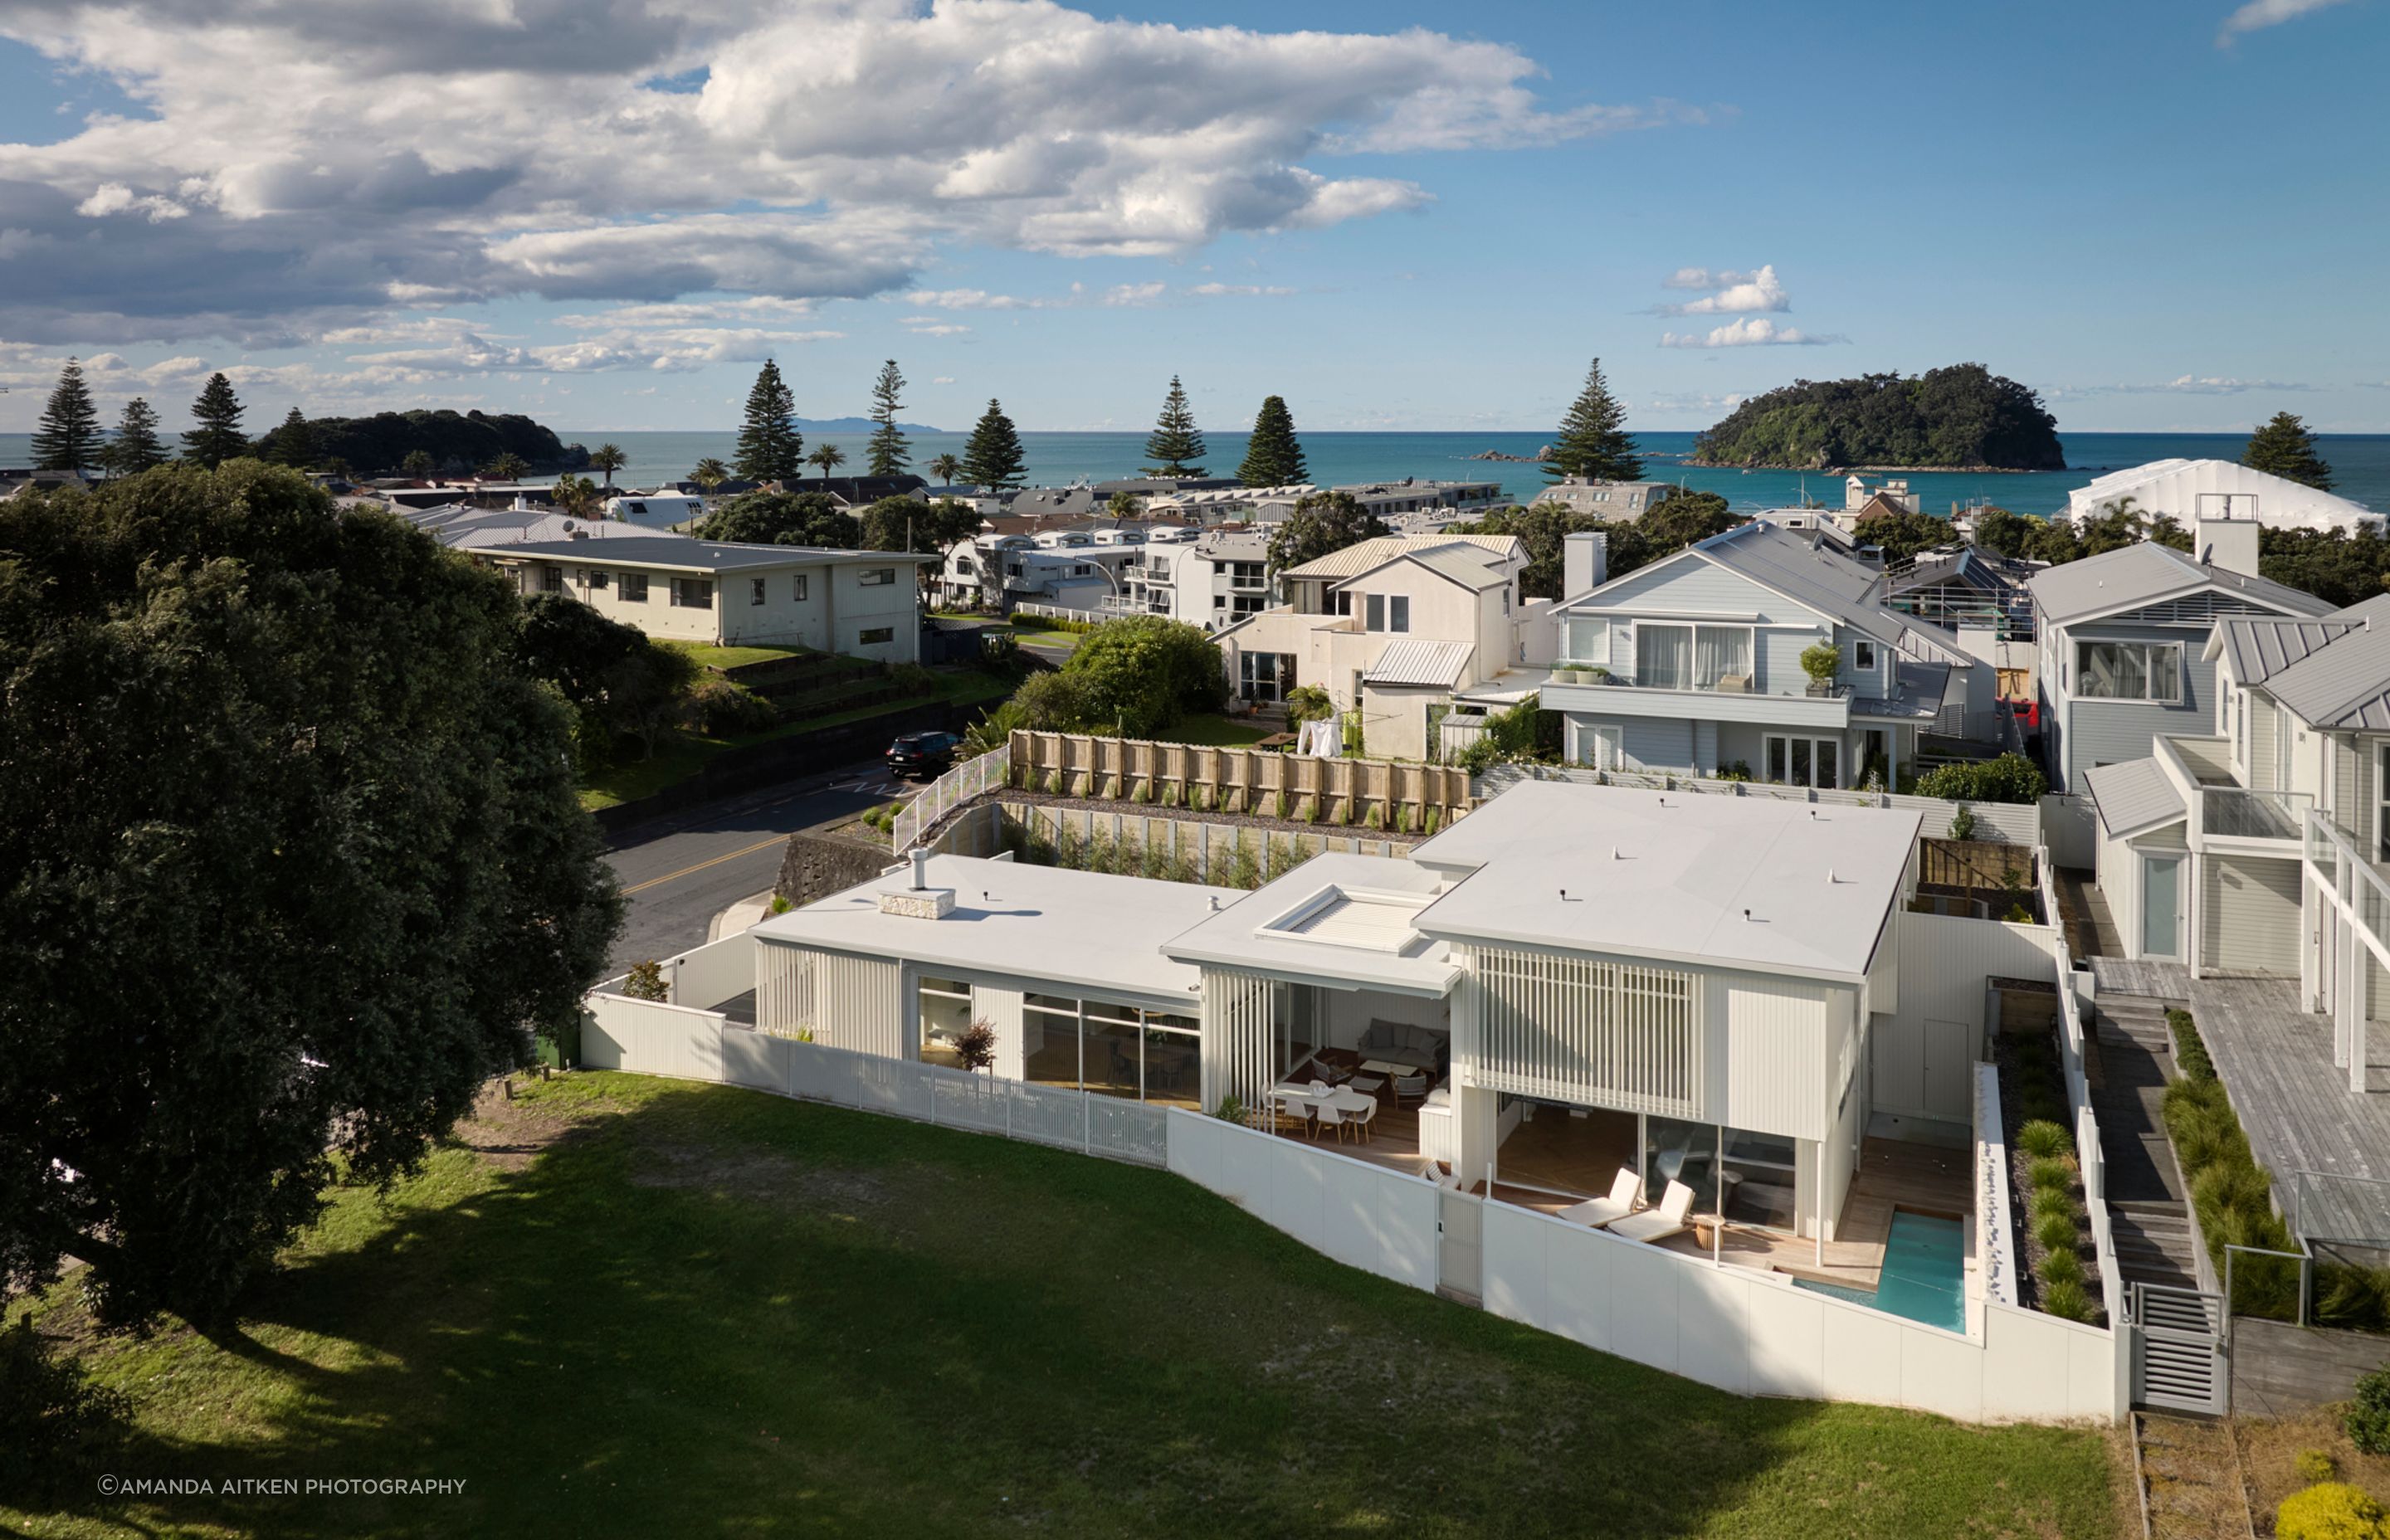 The site was a sought-after find in the heart of Mount Maunganui, only a 'stone's throw' away from the vibrant town centre and famed white-sand beach.